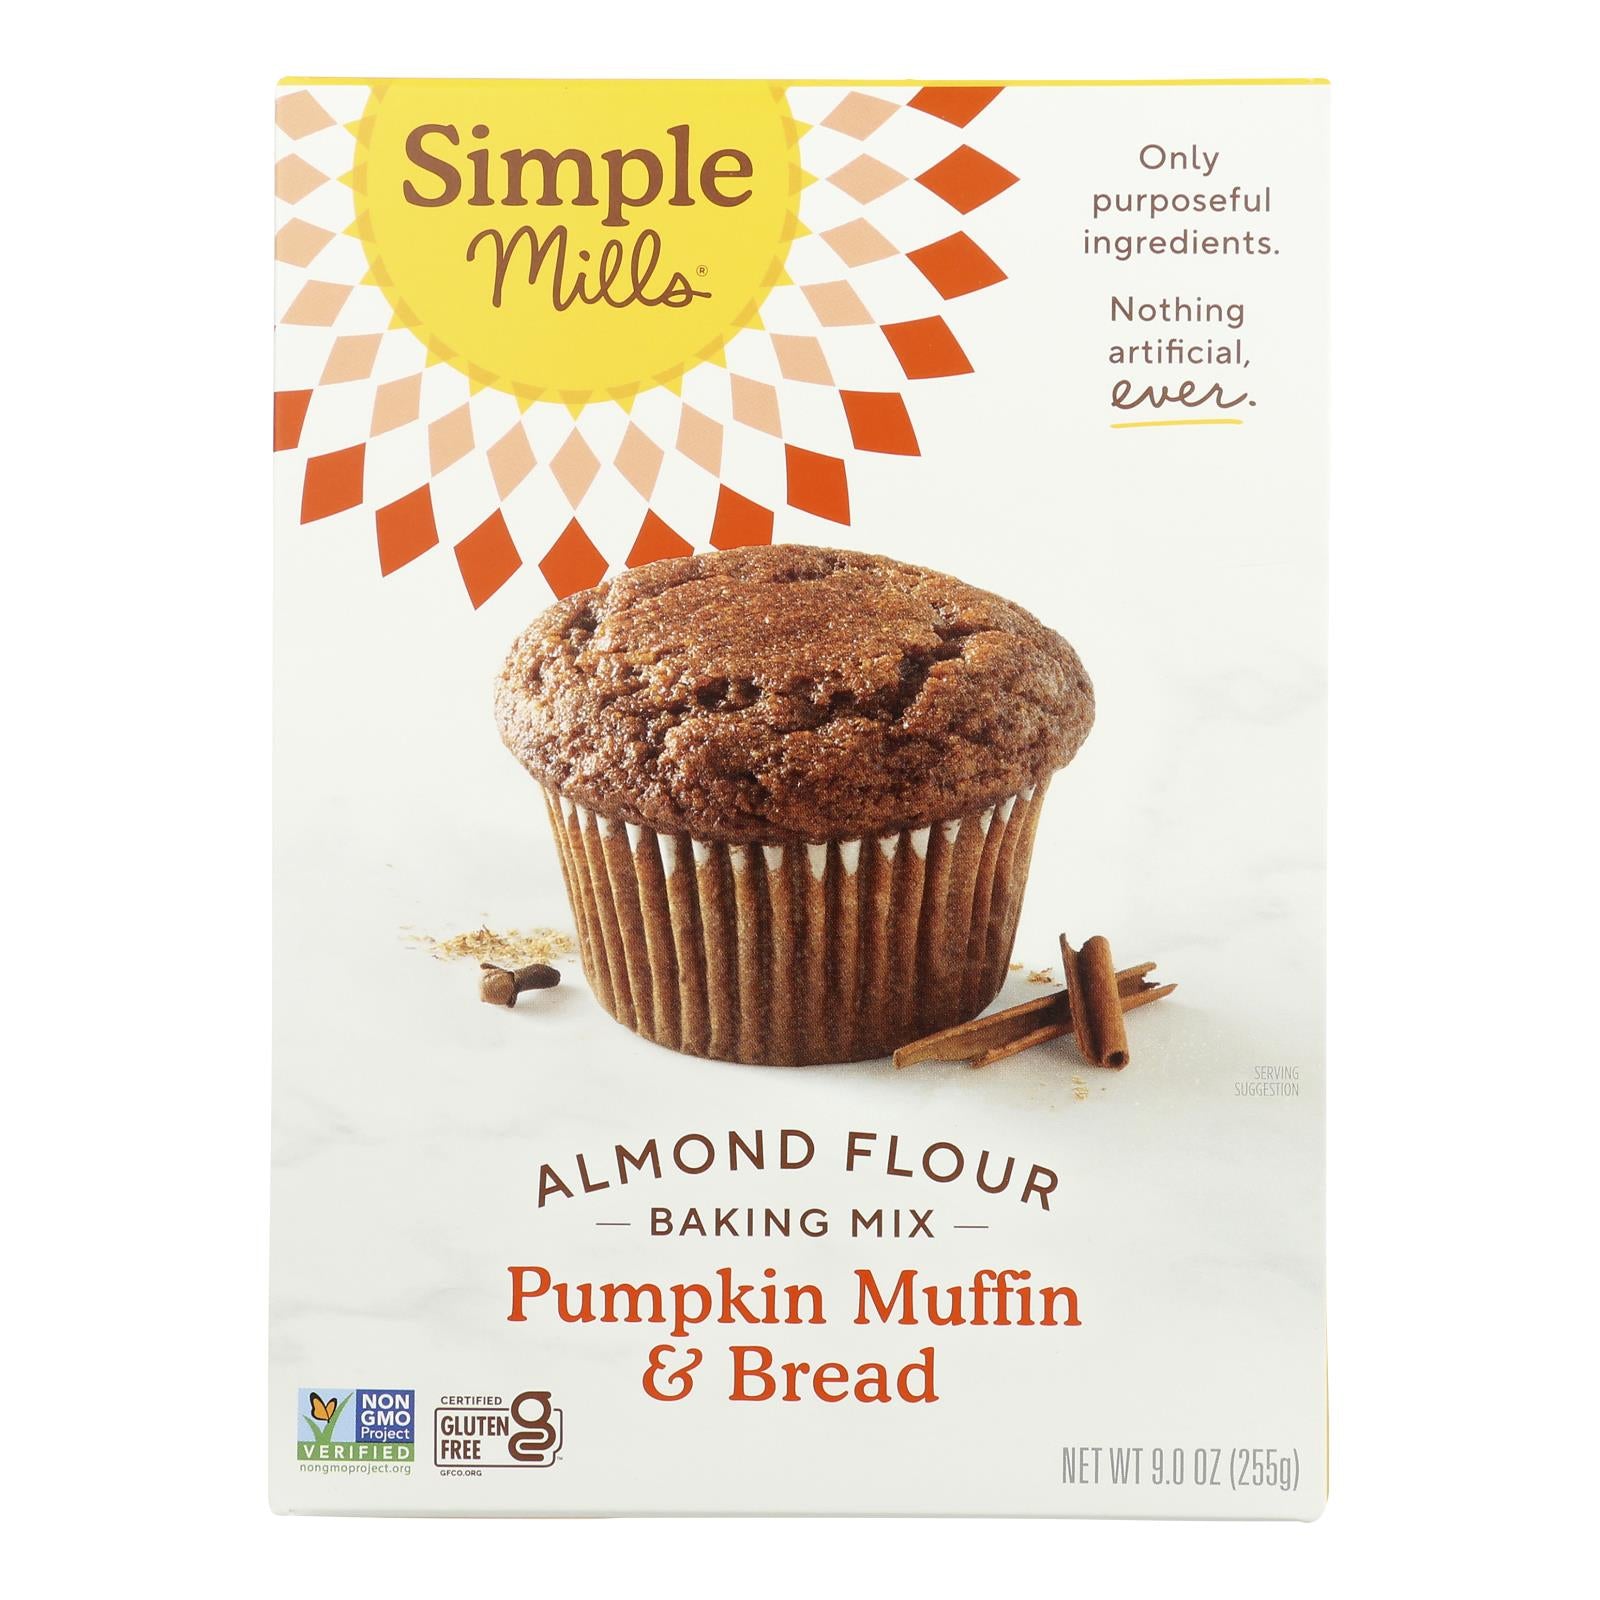 Simple Mills Almond Flour Pumpkin Muffin And Bread Mix - Case Of 6 - 9 Oz.